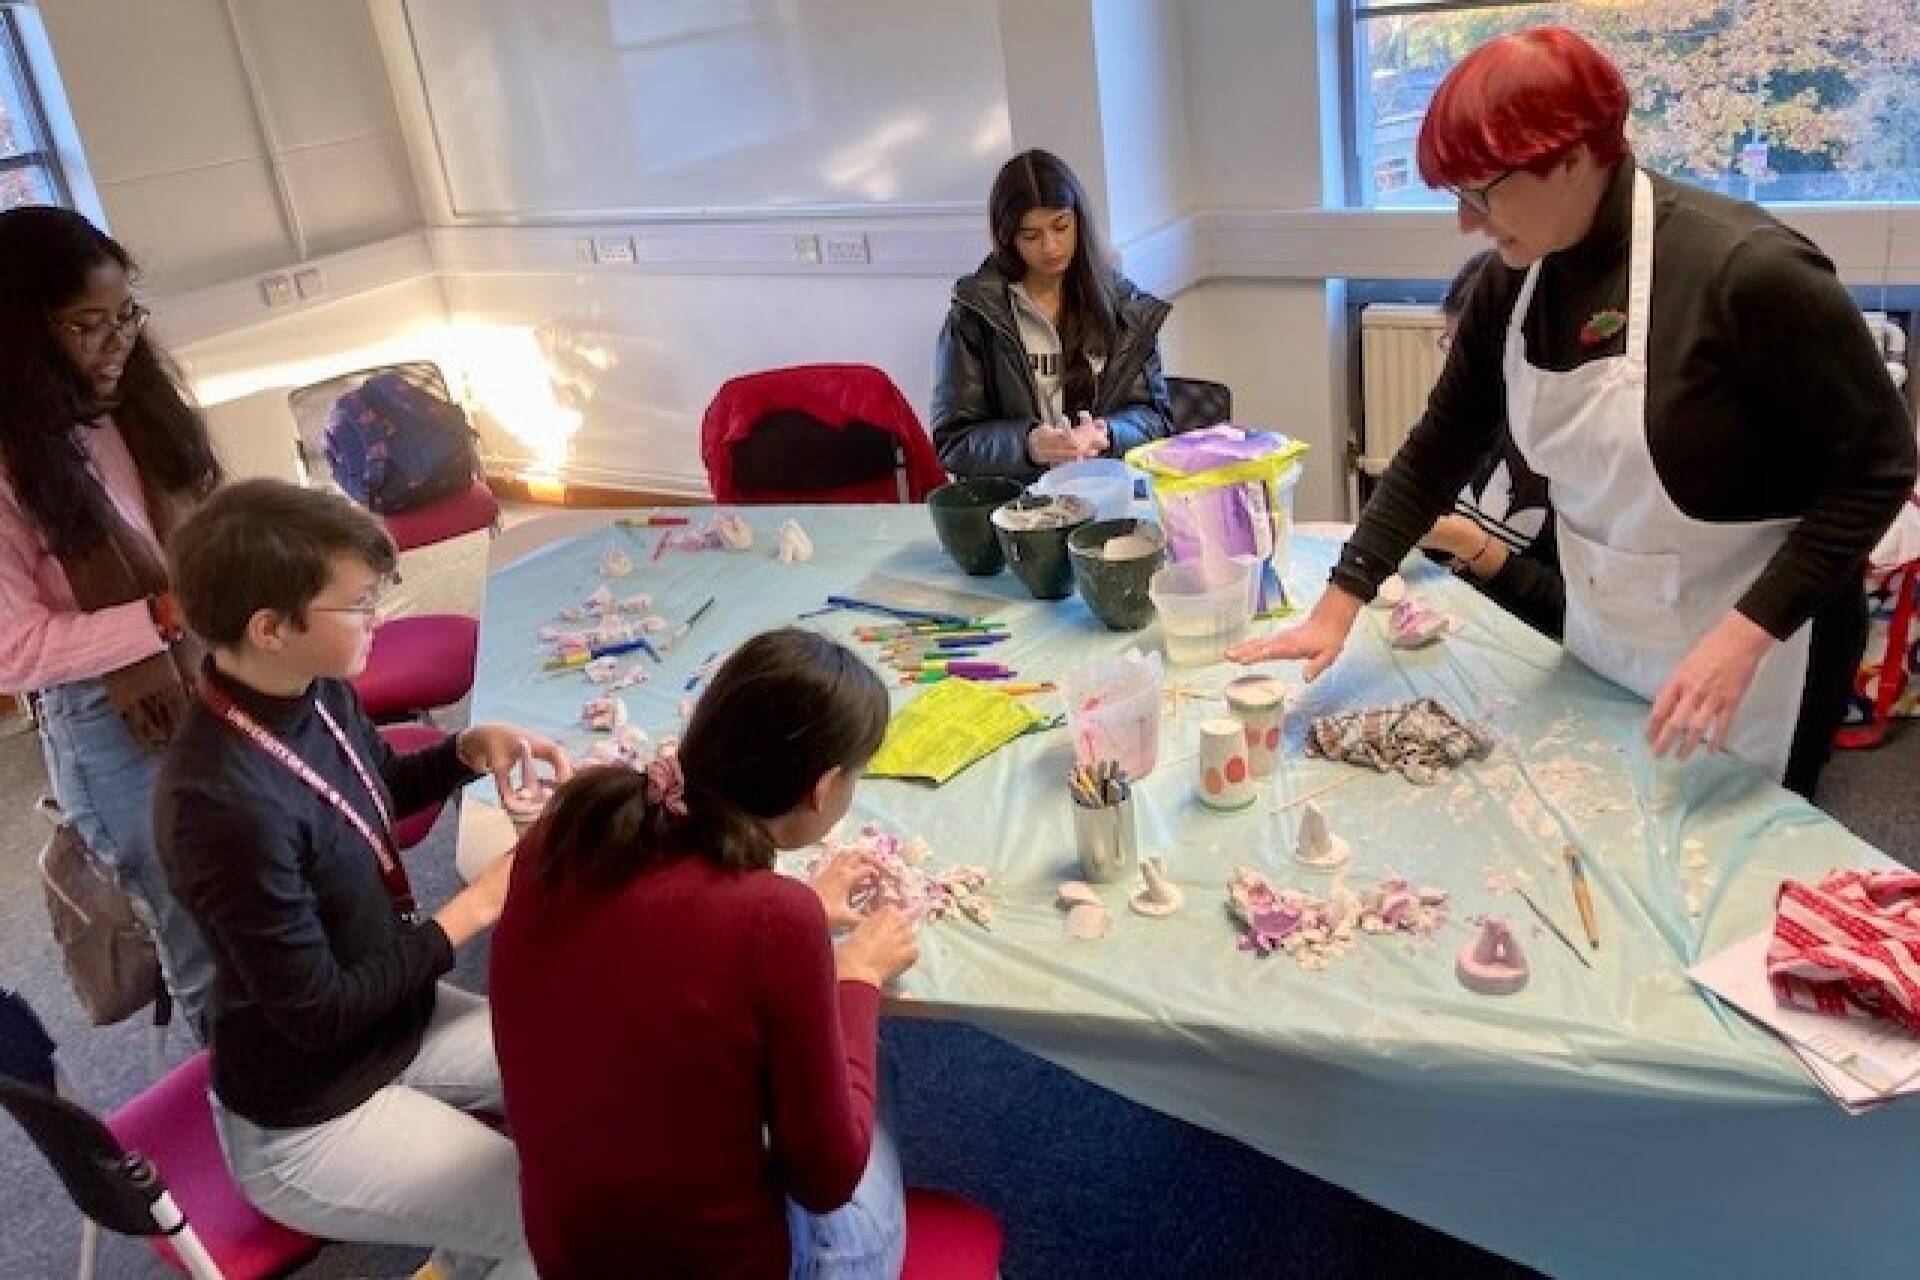 Group of students seated at a table with craft activities.